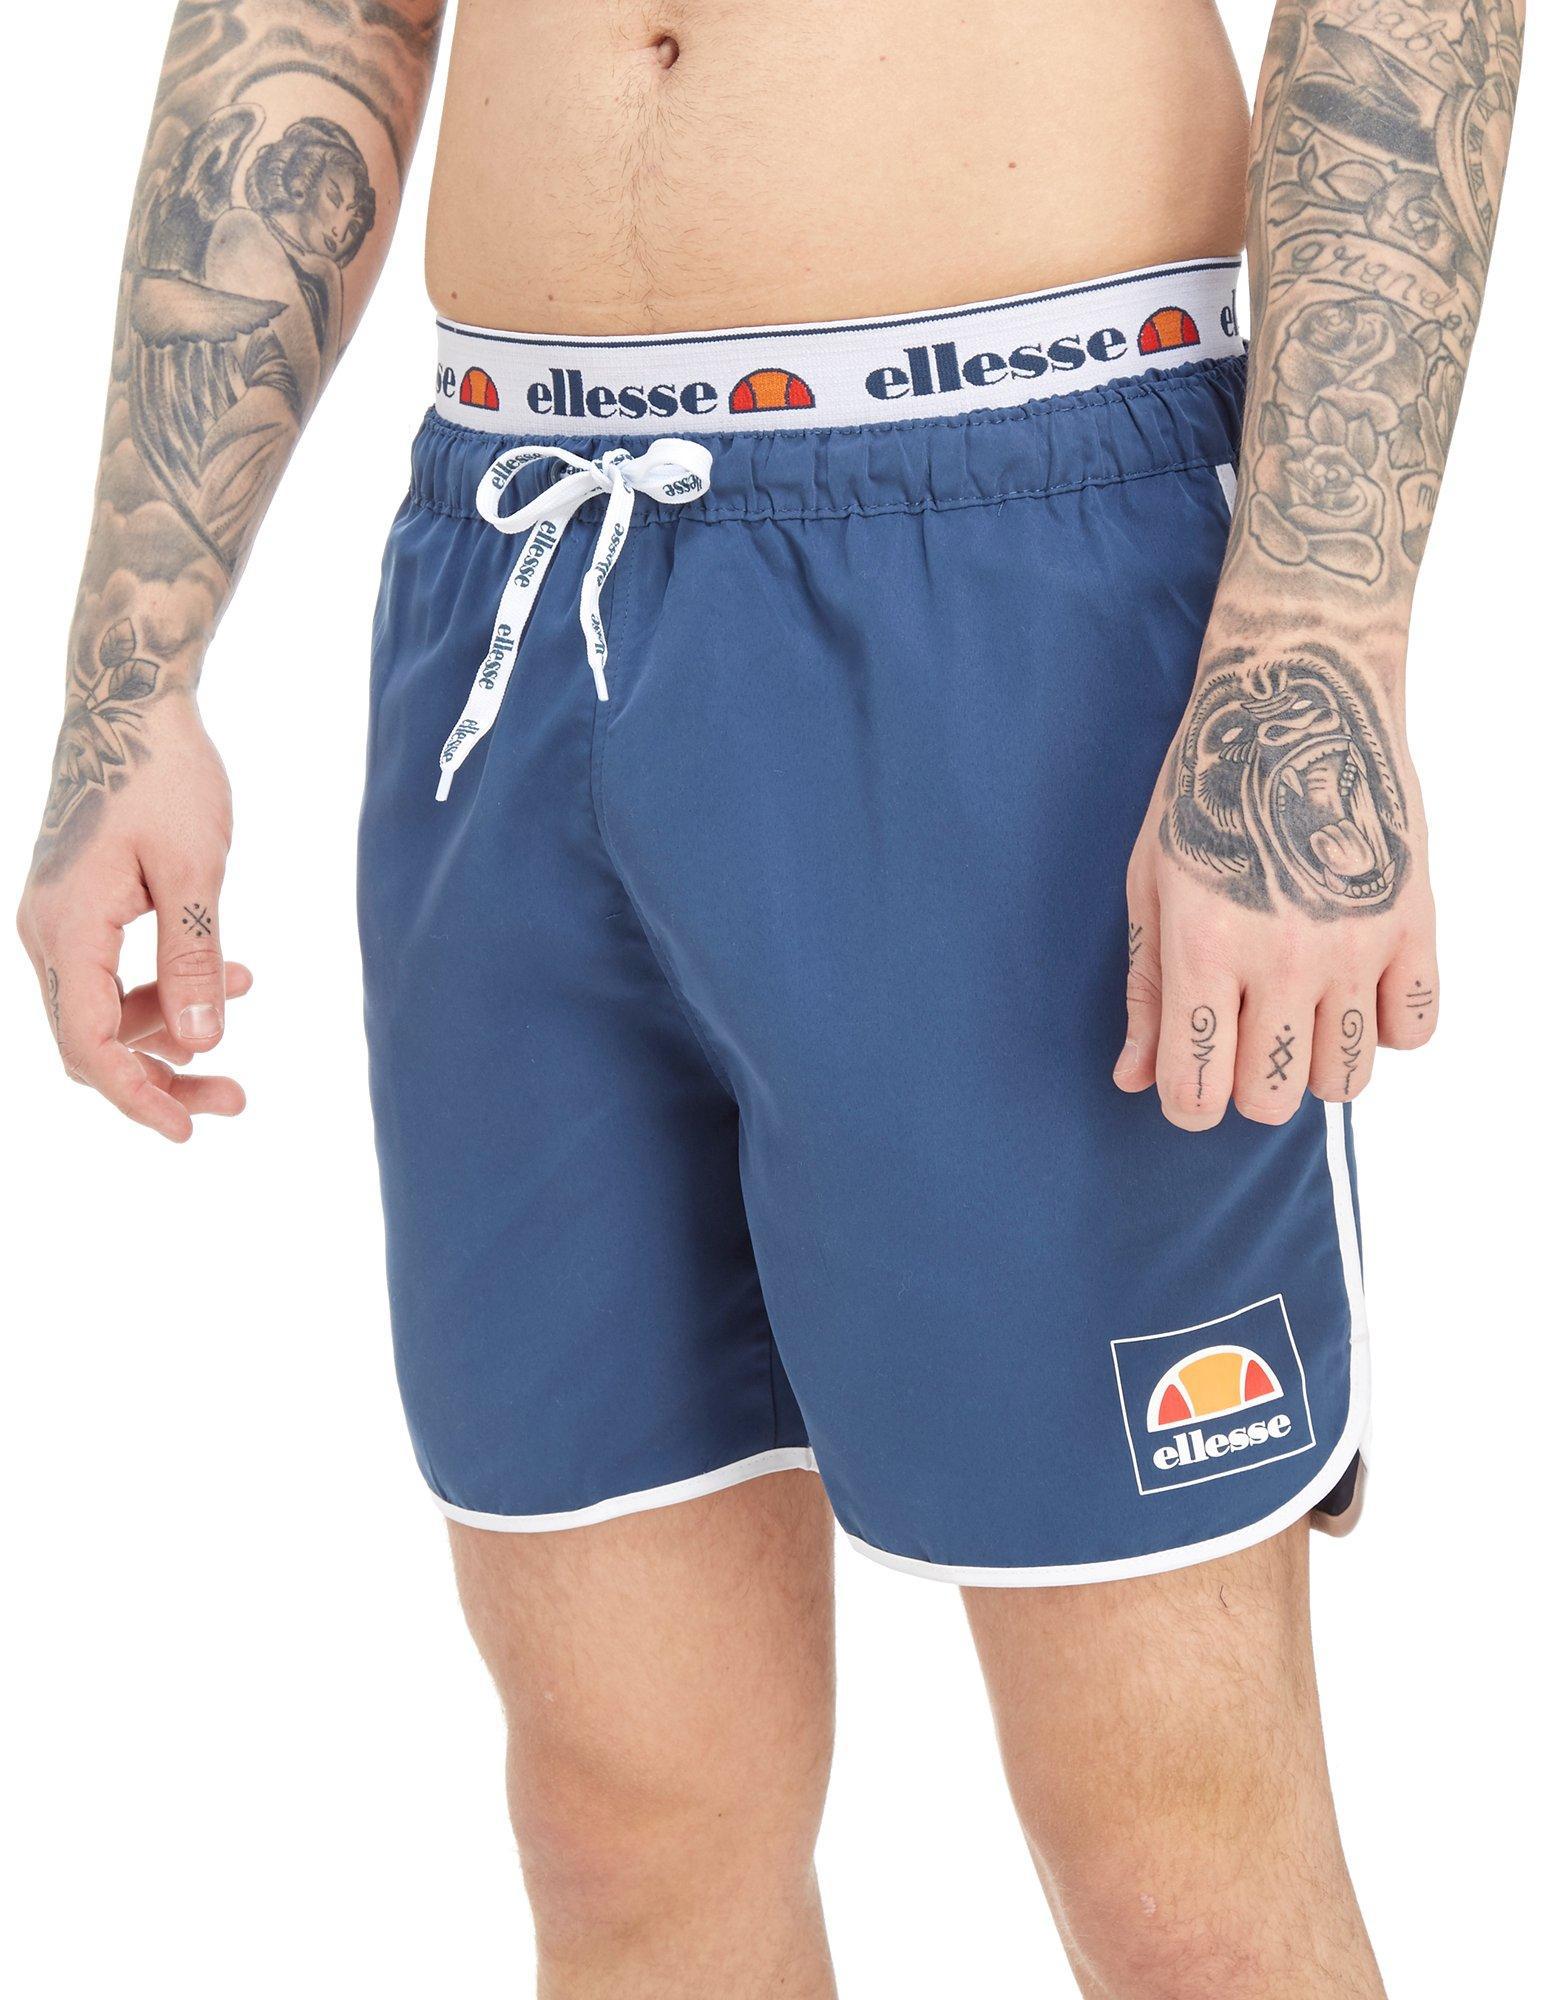 Ellesse Synthetic Rolani Shorts in Blue/White (Blue) for Men - Lyst